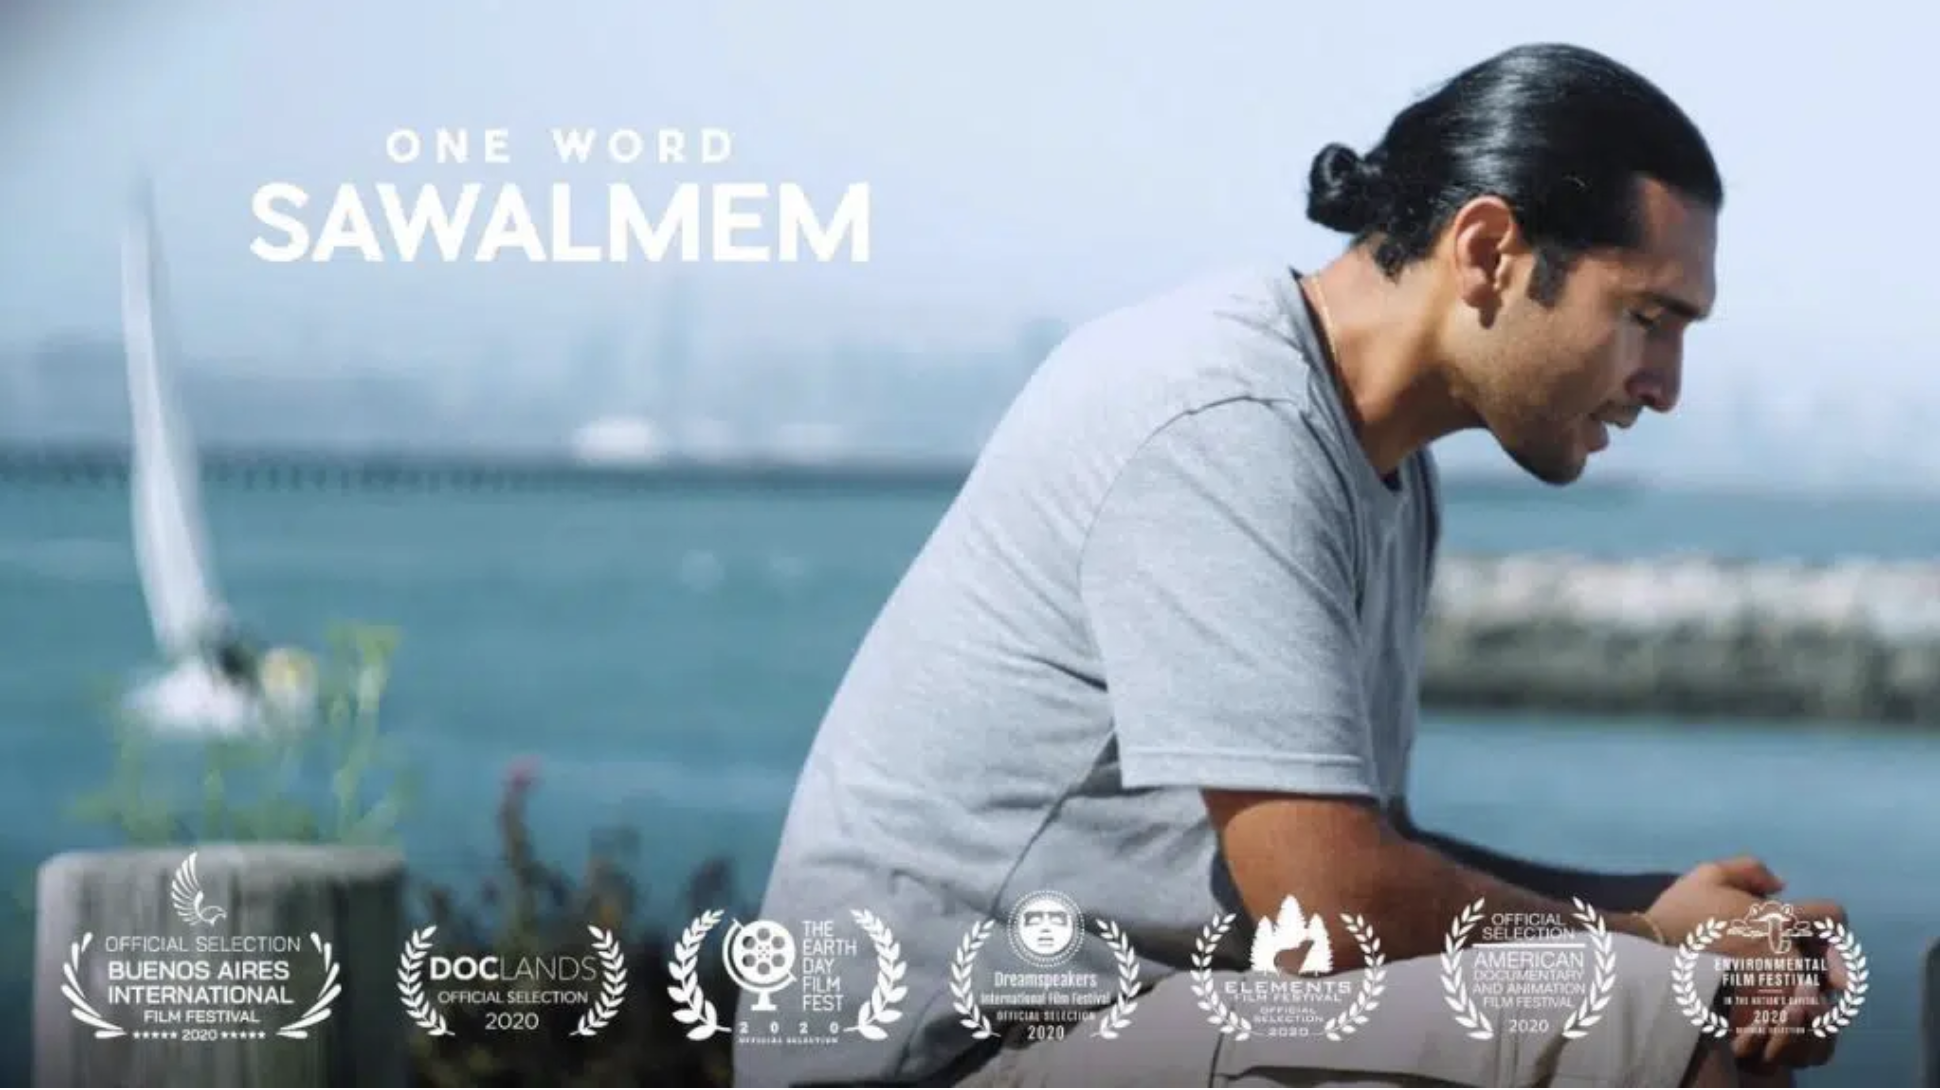 One Word Sawalmem movie title on out of focus background of San Francisco Bay with Michael 